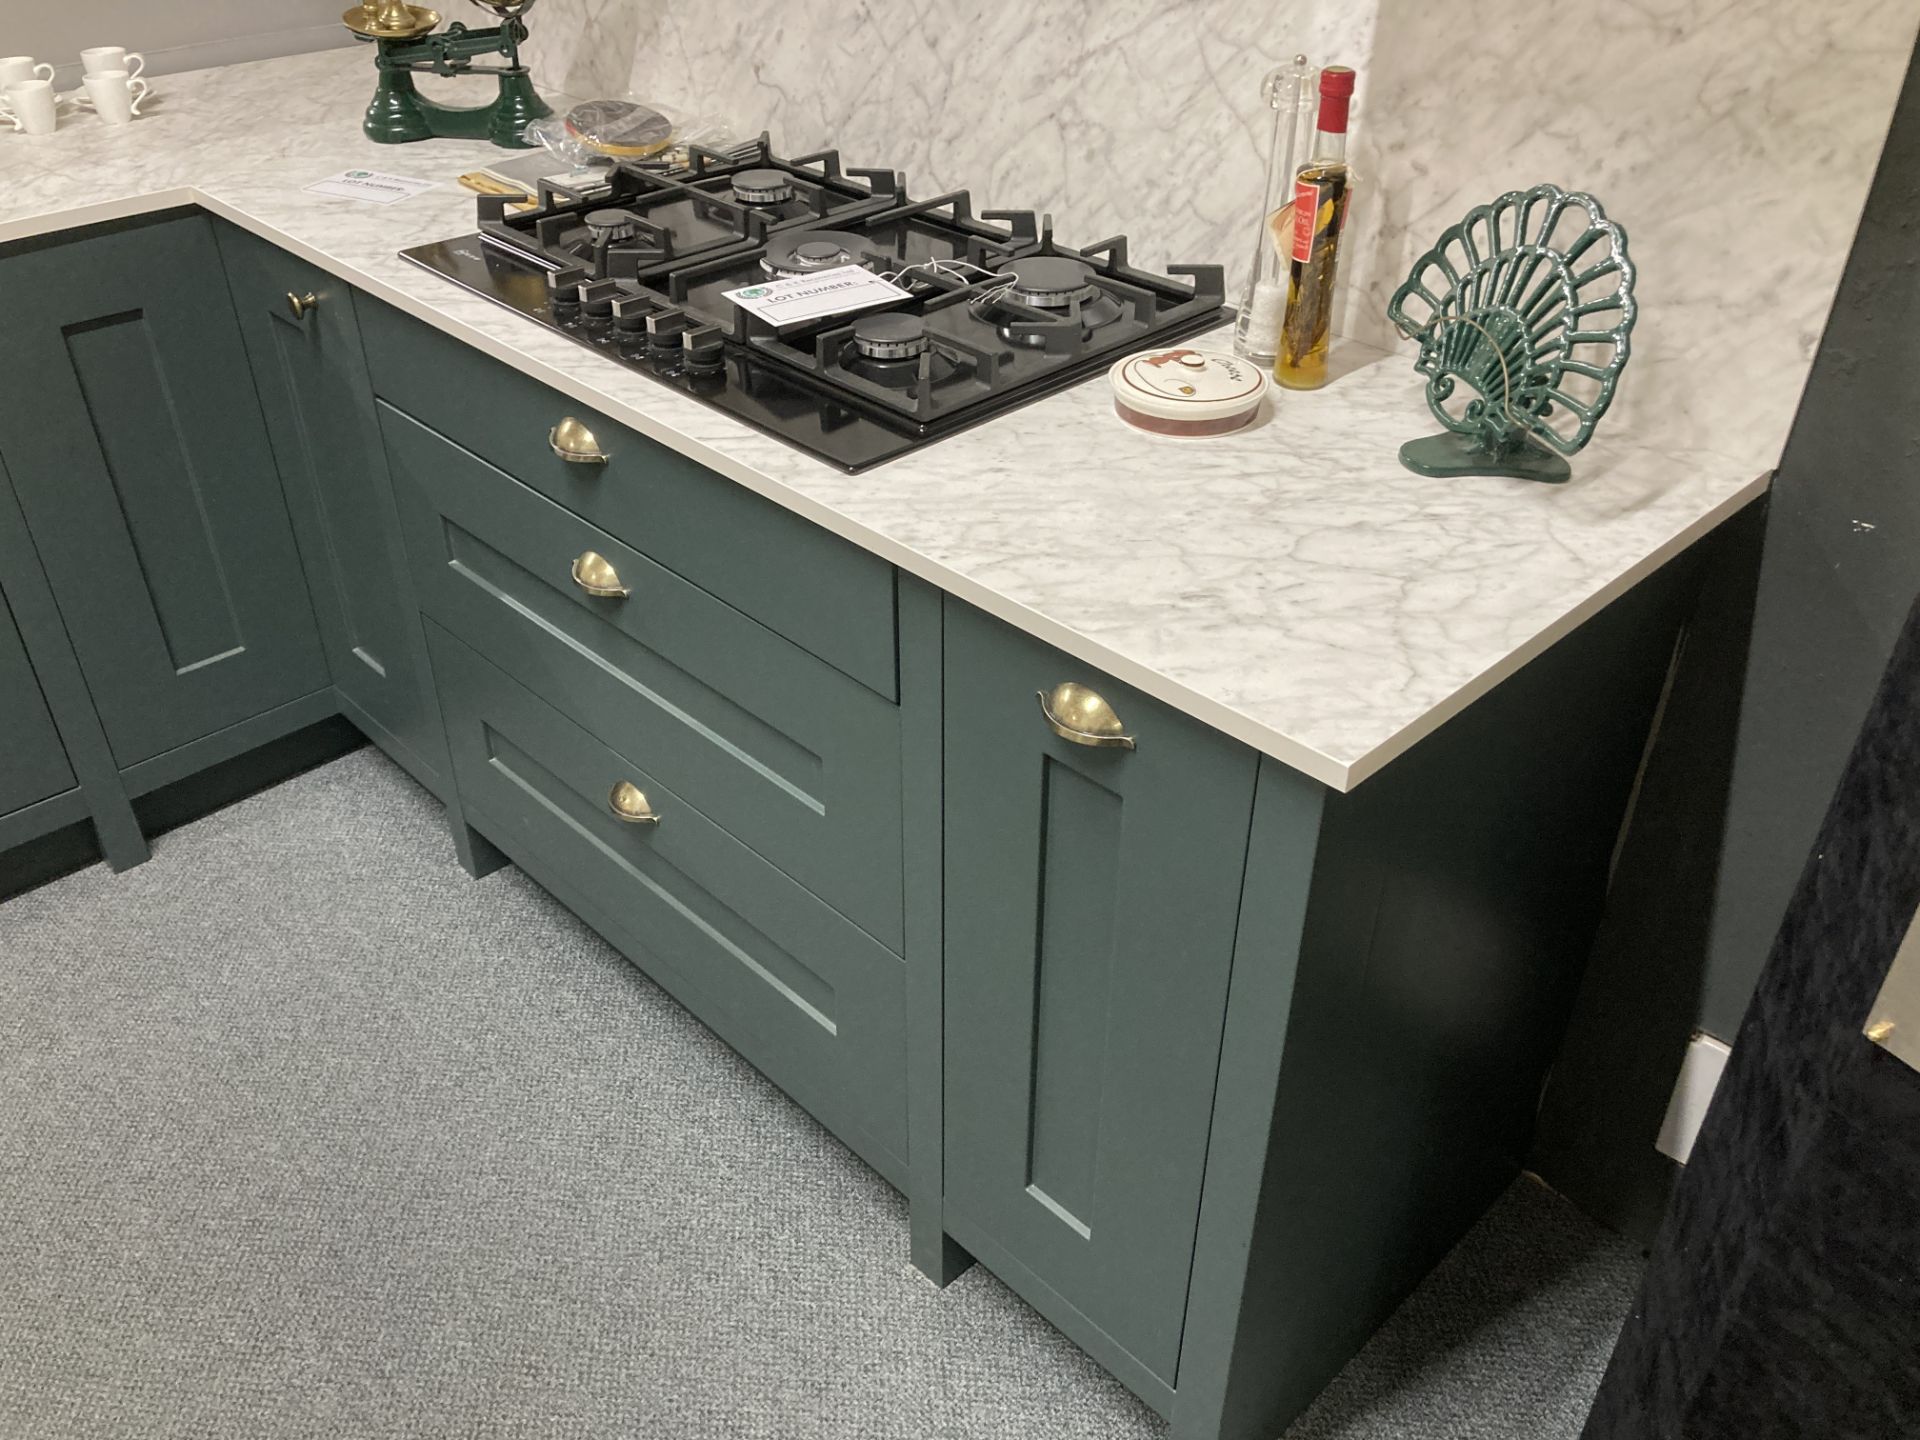 Teal painted kitchen display with appliances - Image 3 of 11